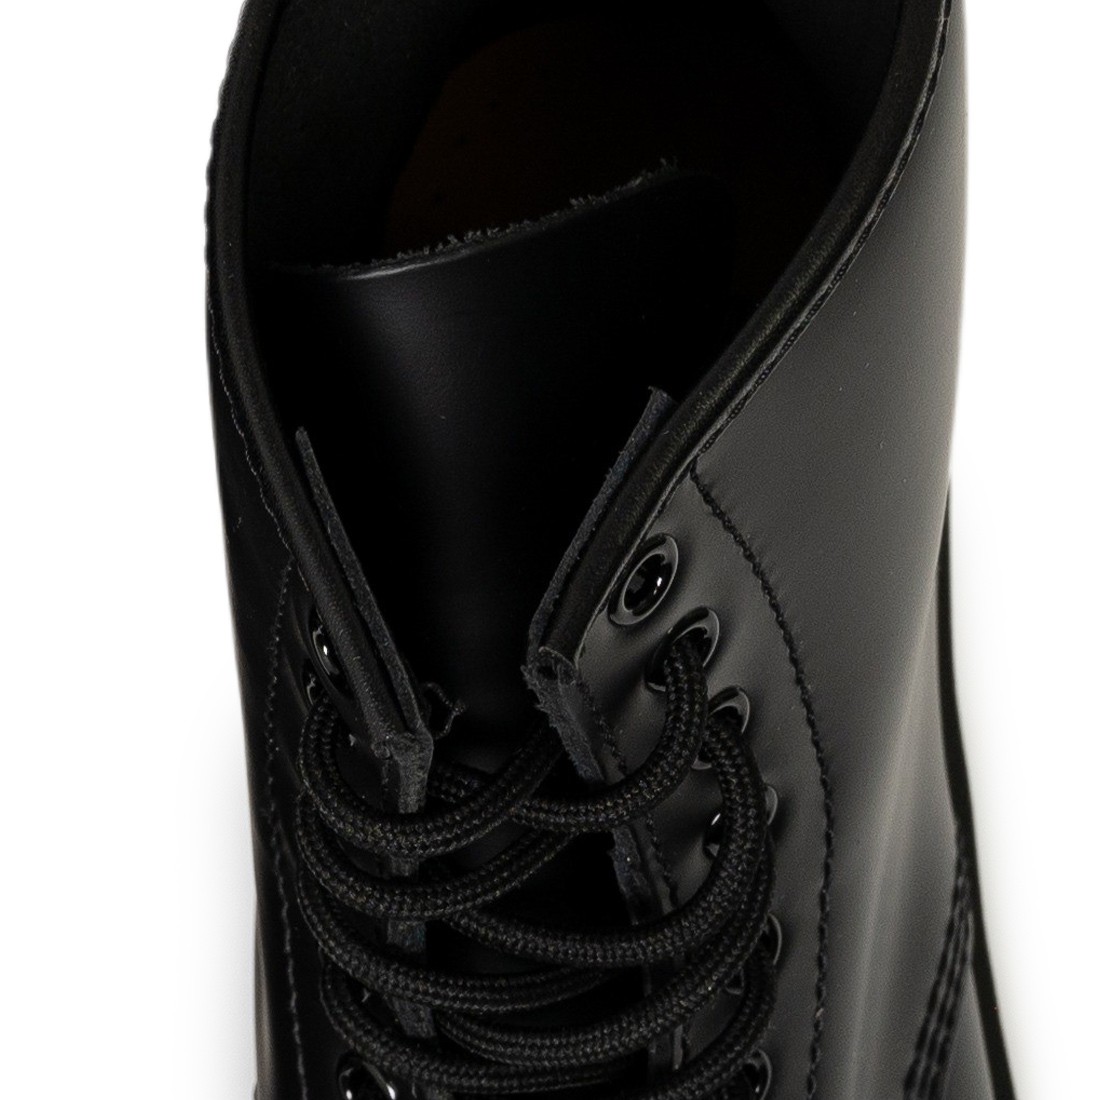 Dr. Martens Men 1460 Smooth Leather Lace Up Boots black black smooth